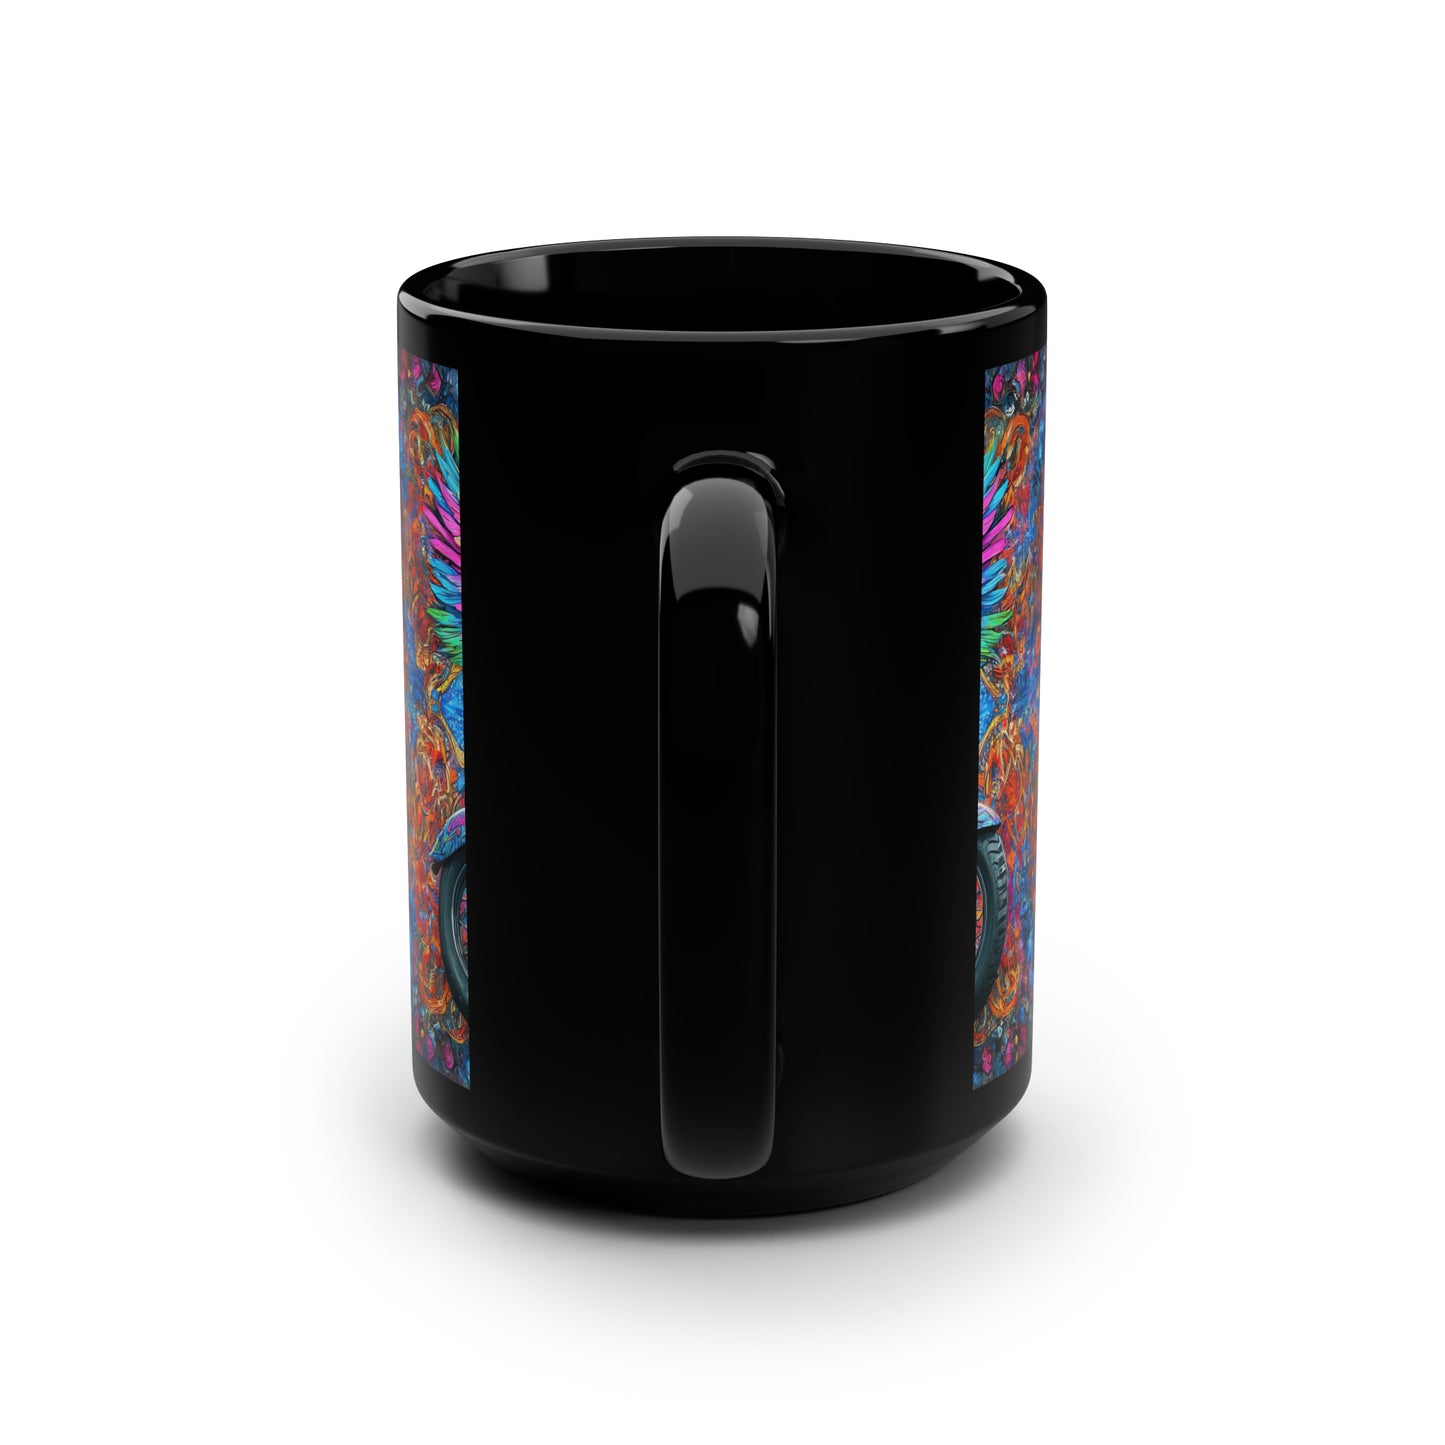 Eclipse of Freedom: Psychedelic Wings Black Mug, 15oz